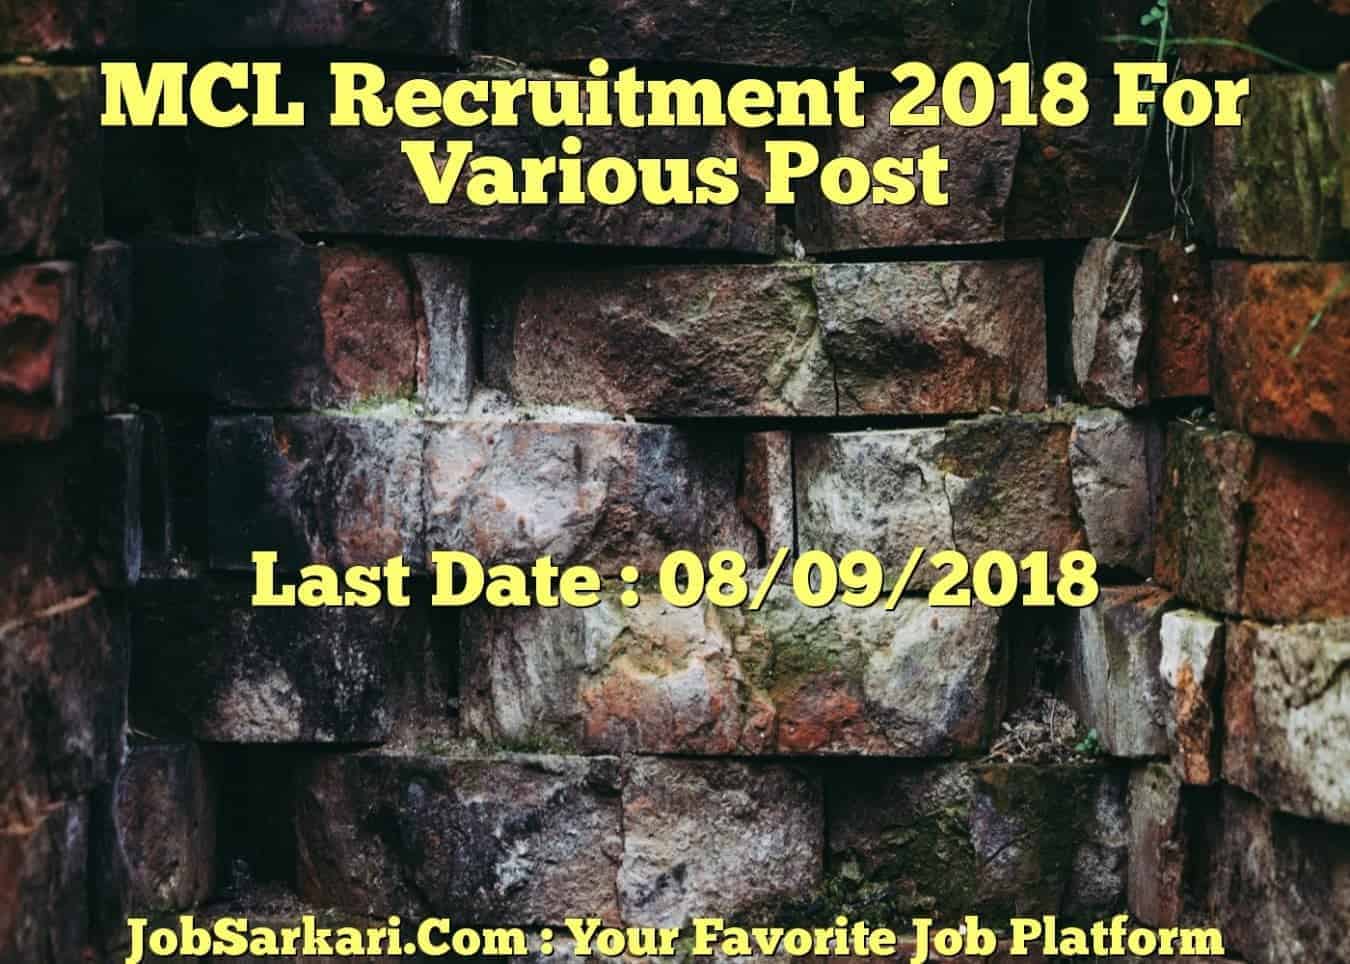 MCL Recruitment 2018 For Various Post